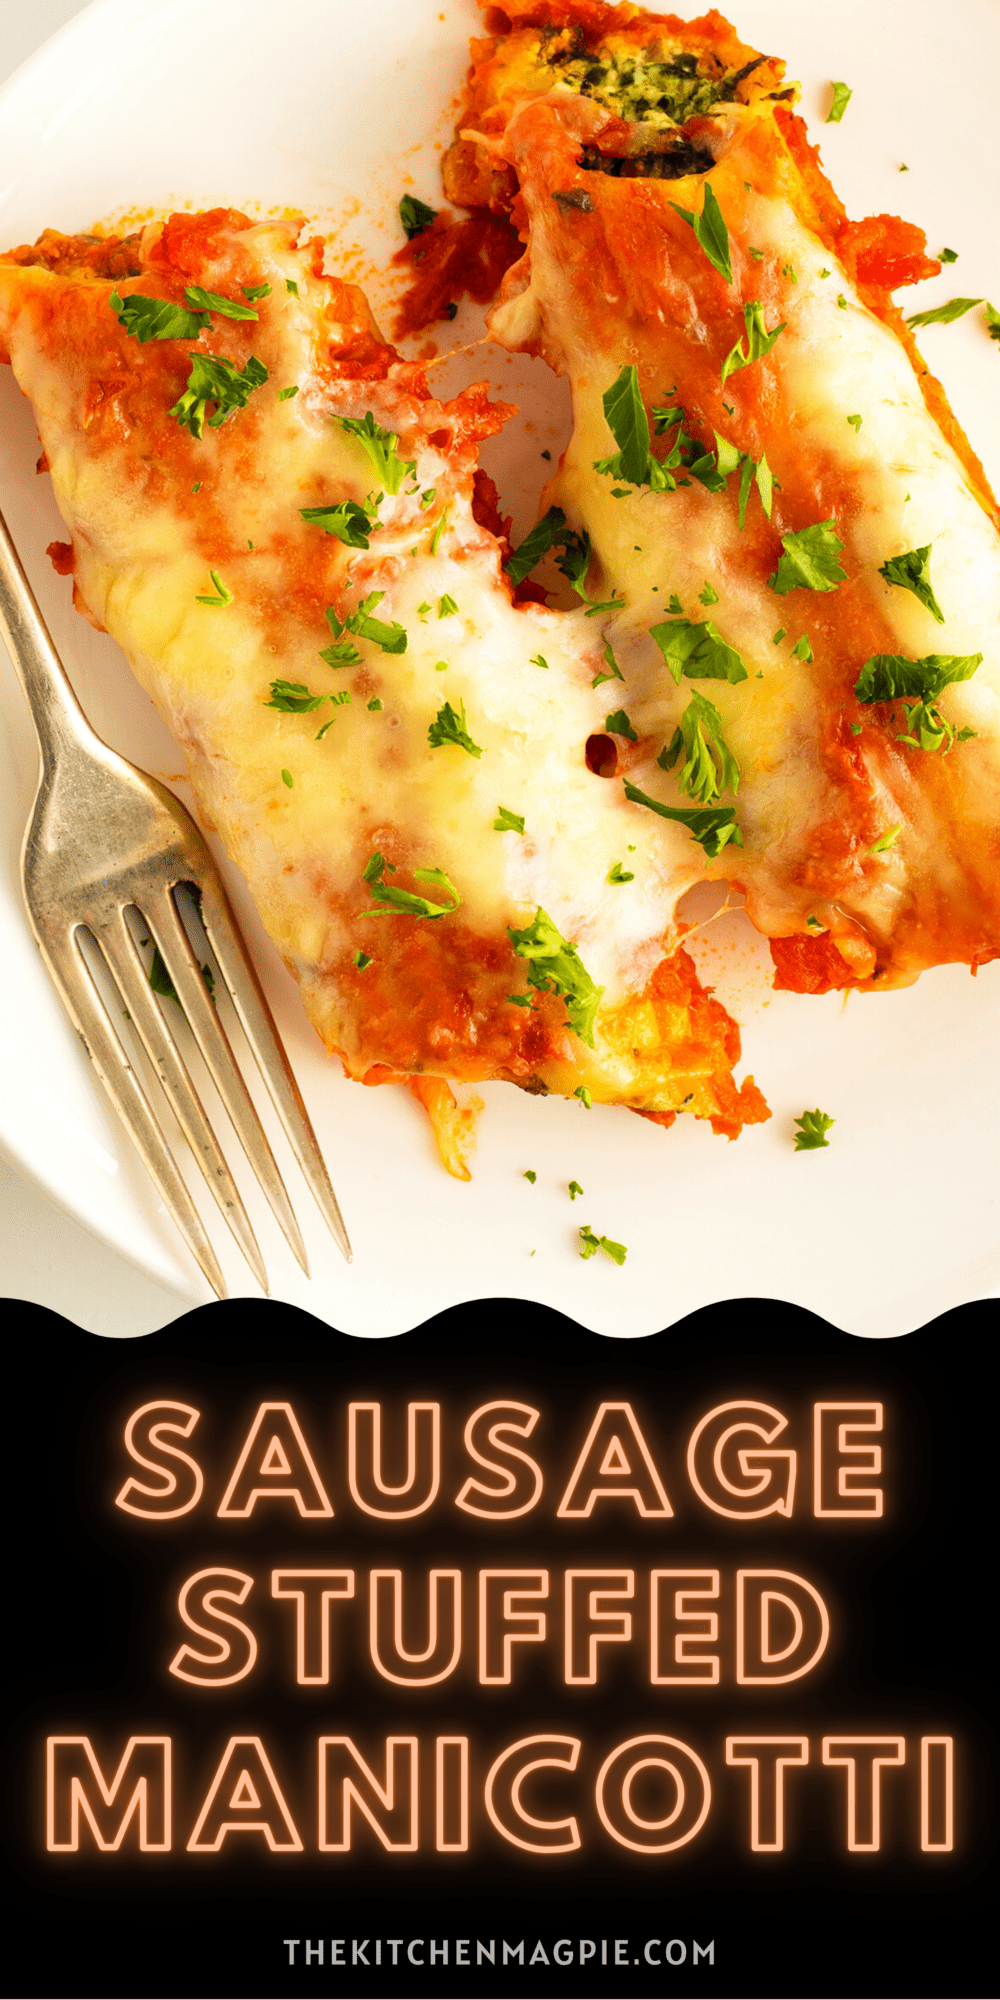 You can enjoy your very own sausage and cheese-filled manicotti at home, perfect for a filling family meal after a hard day.